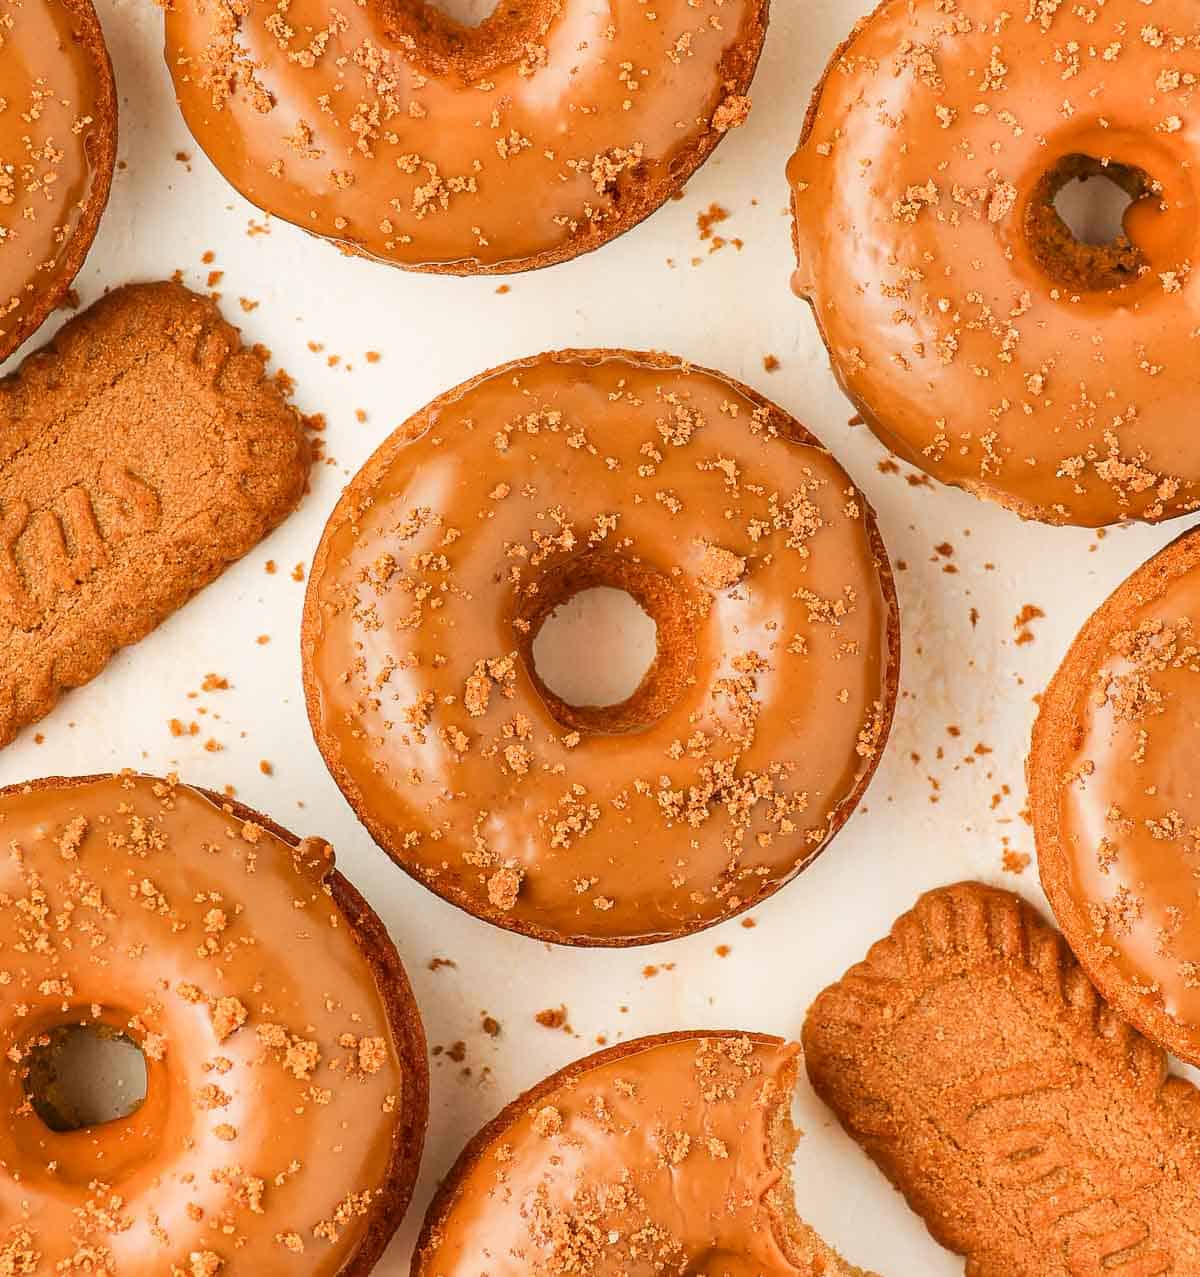 Donuts seen from above on an orange surface.